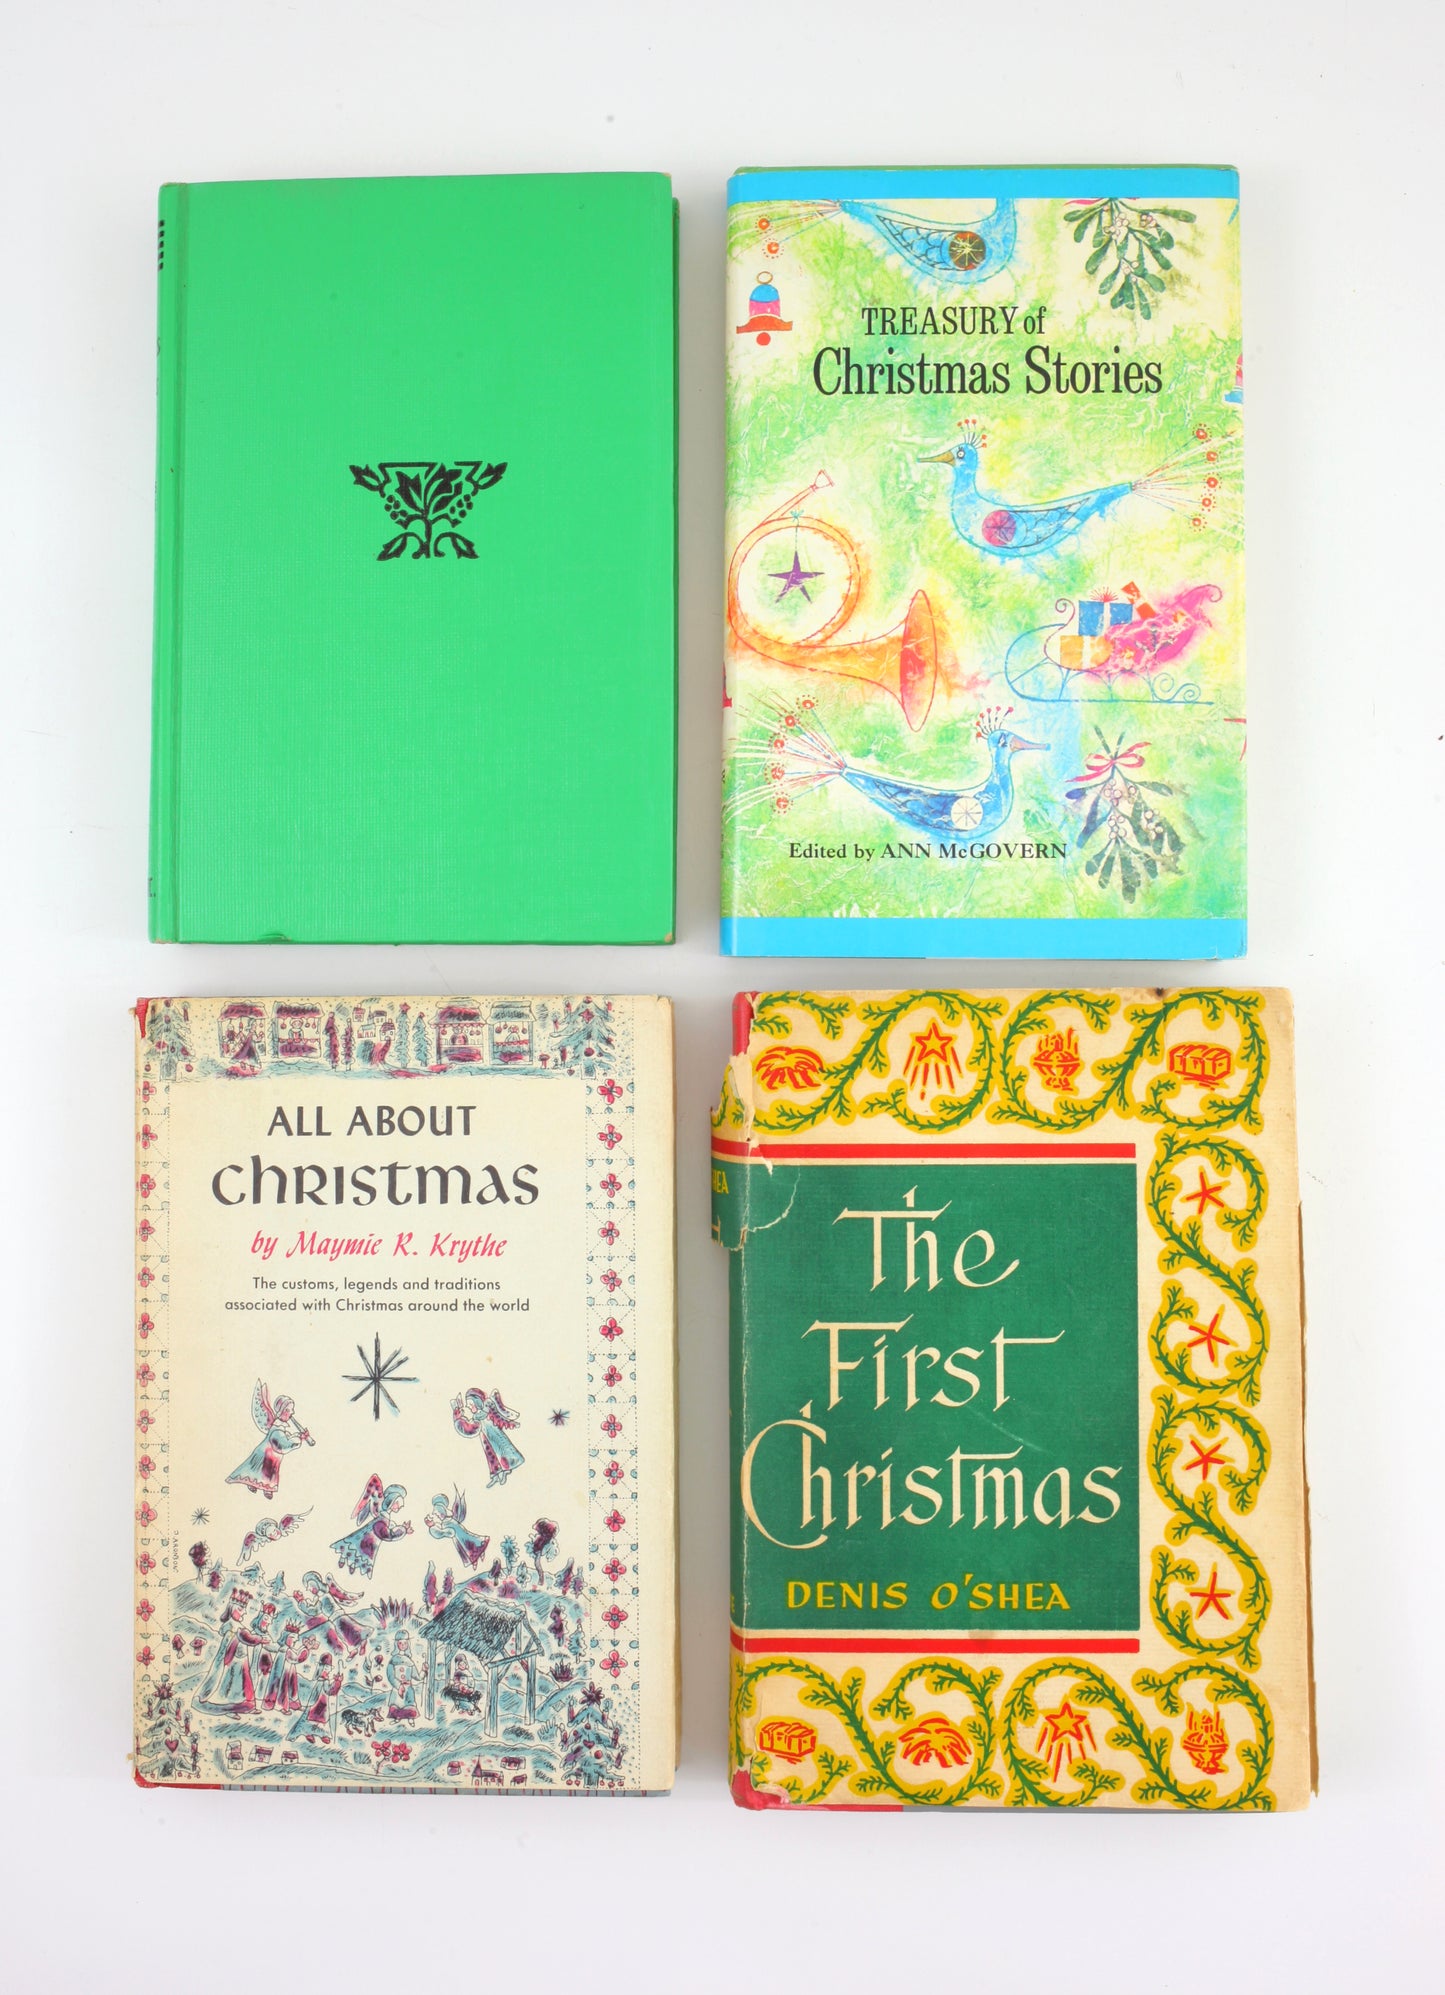 SOLD - Vintage Christmas Book Collection *Free US Shipping*